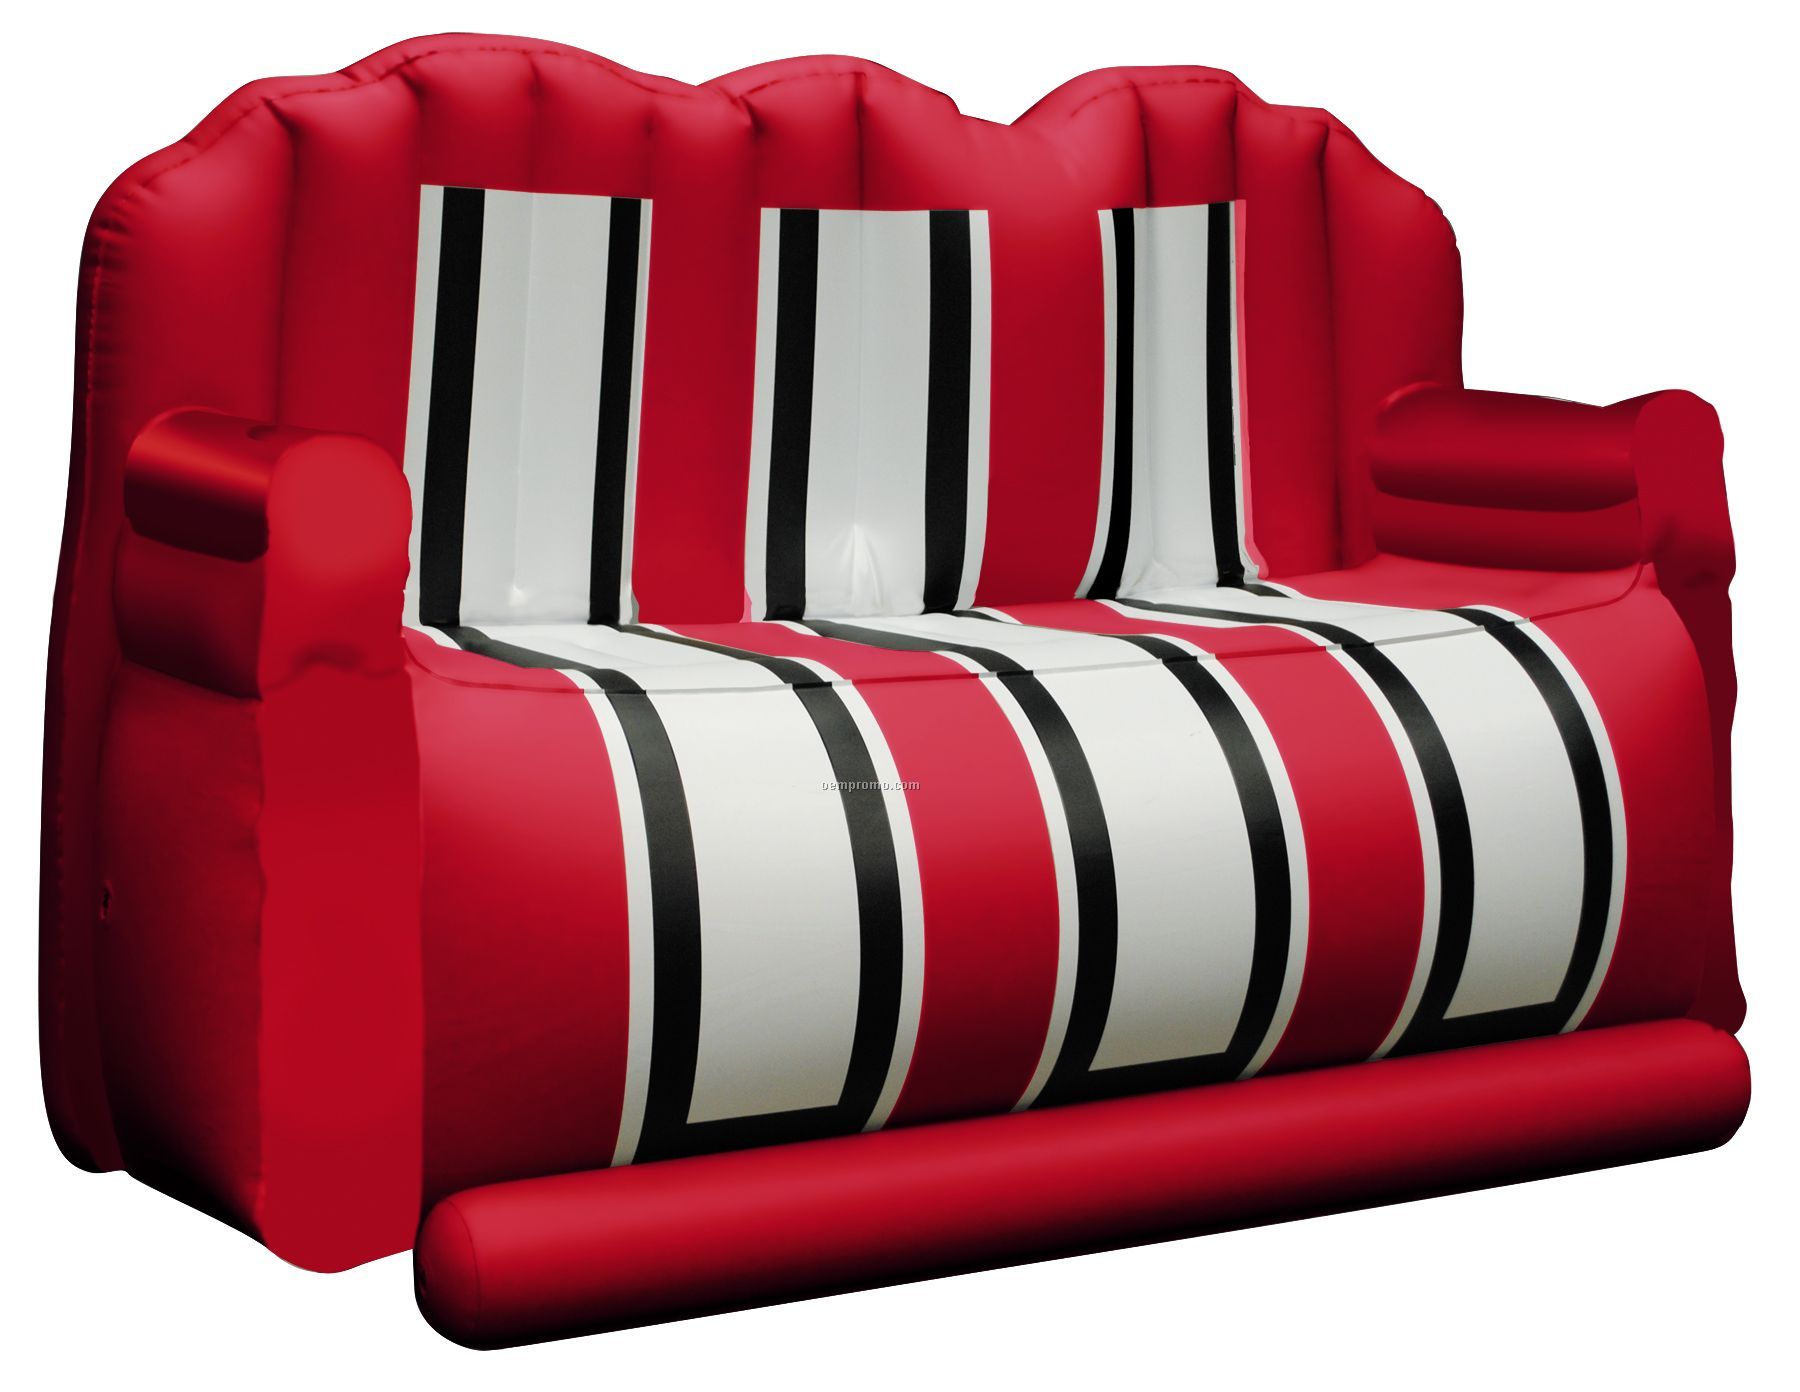 Inflate-a-seat "Couch": Red/White/Black